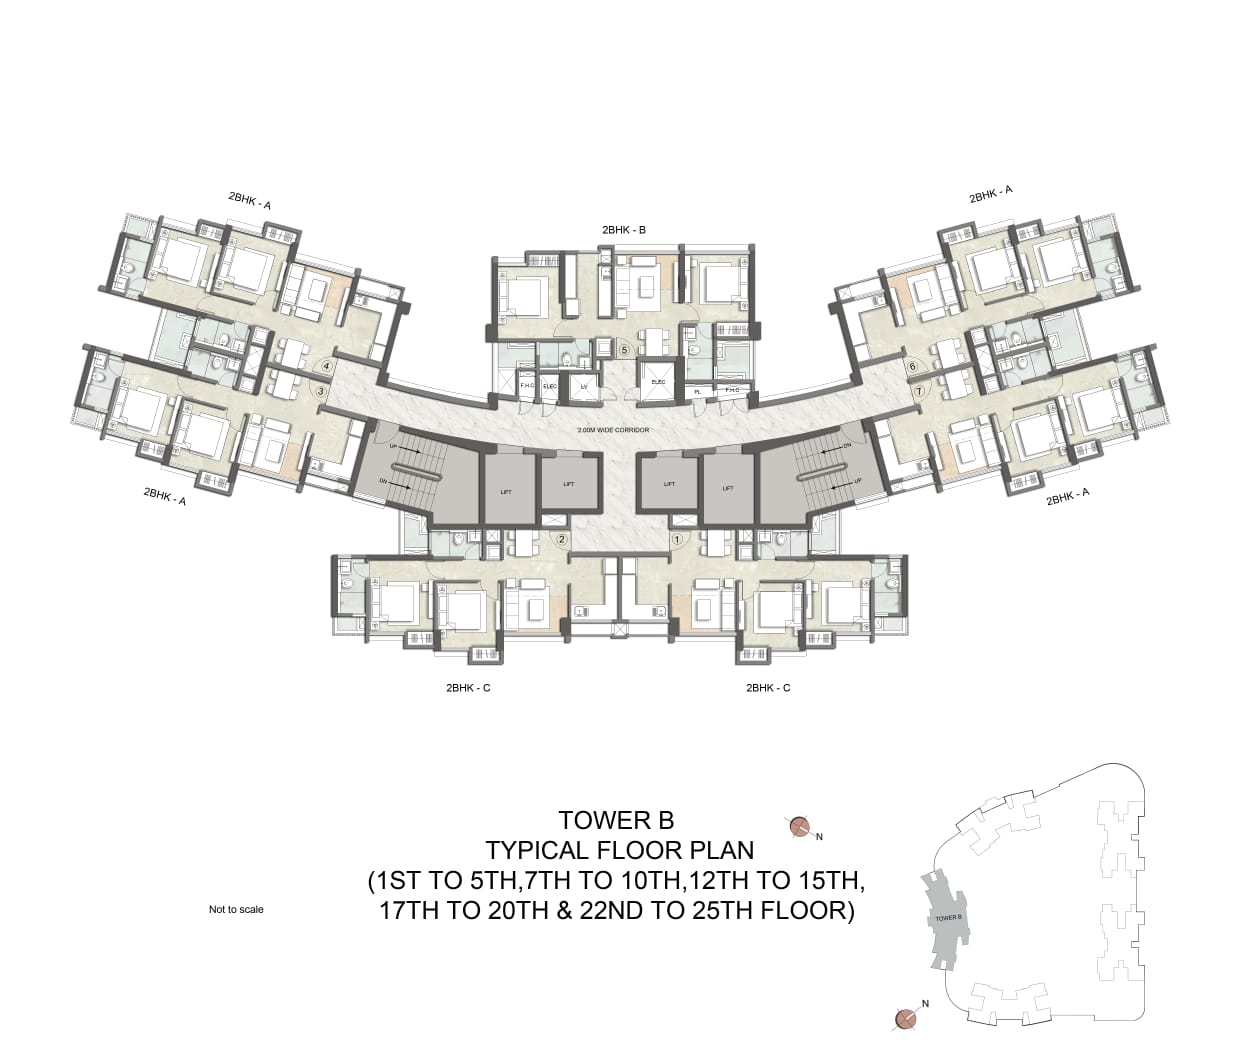 Typical Floor Plan – Tower B